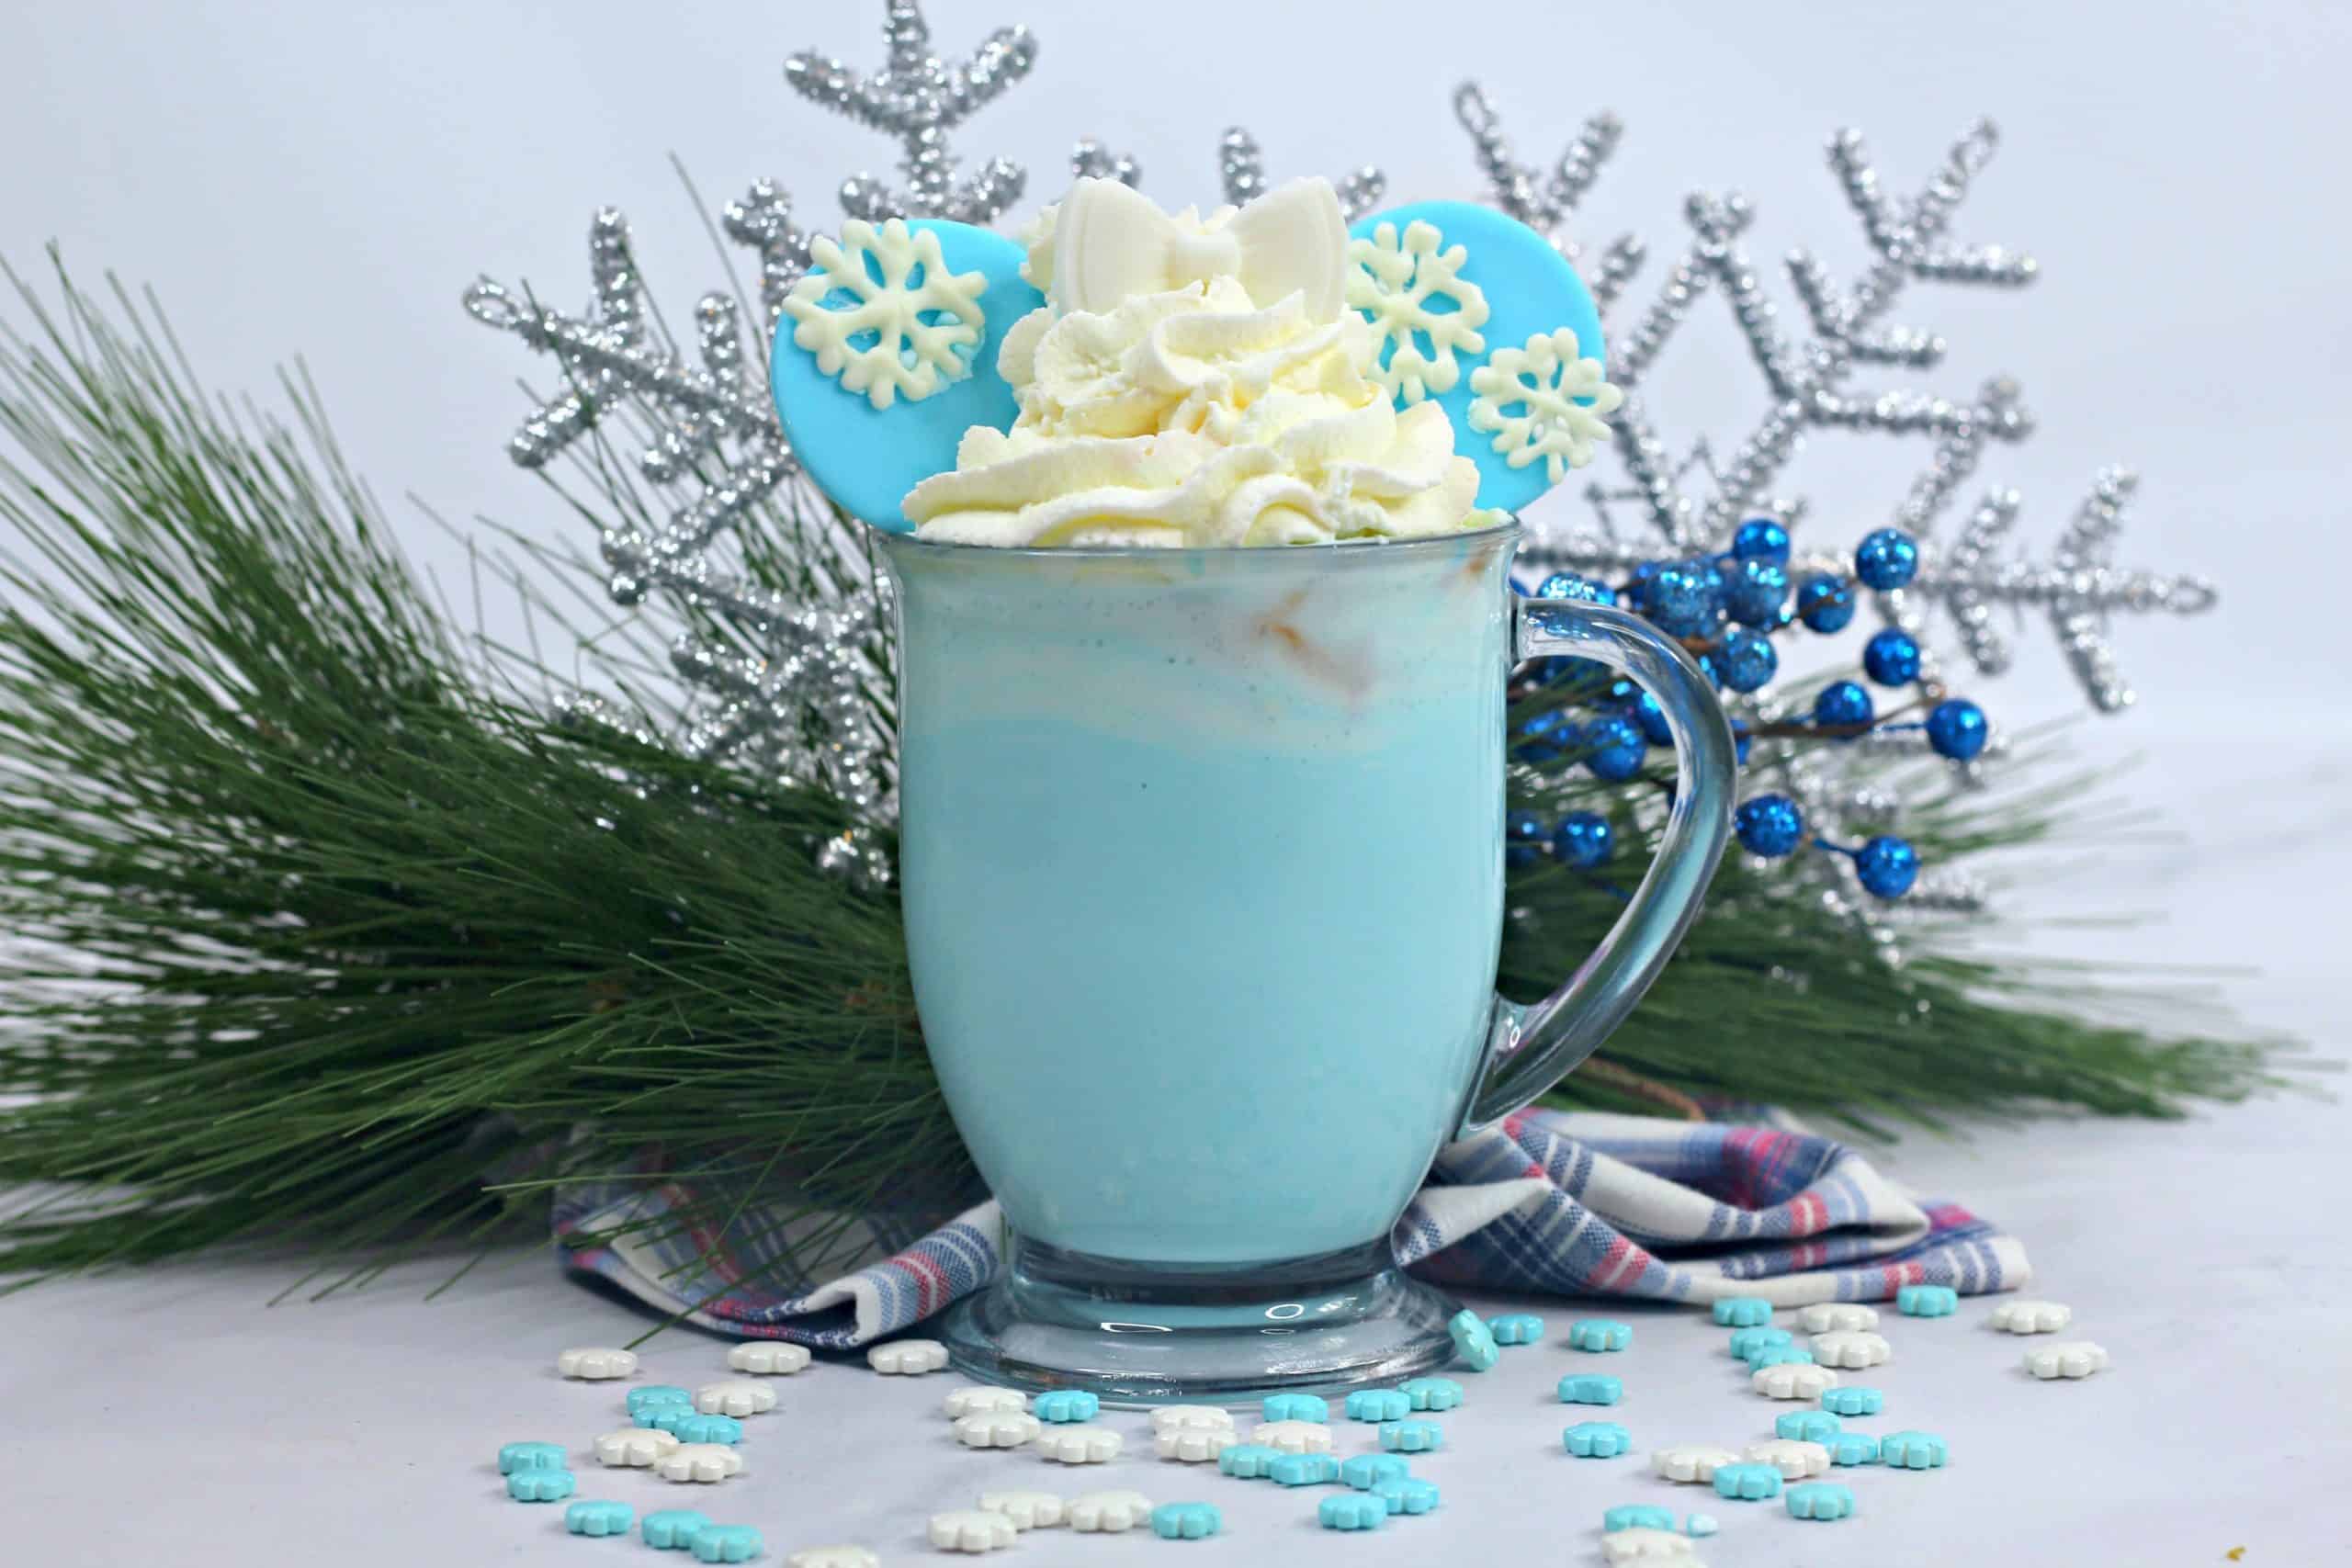 How to make the most delicious Hot Chocolate for Frozen 2 fans